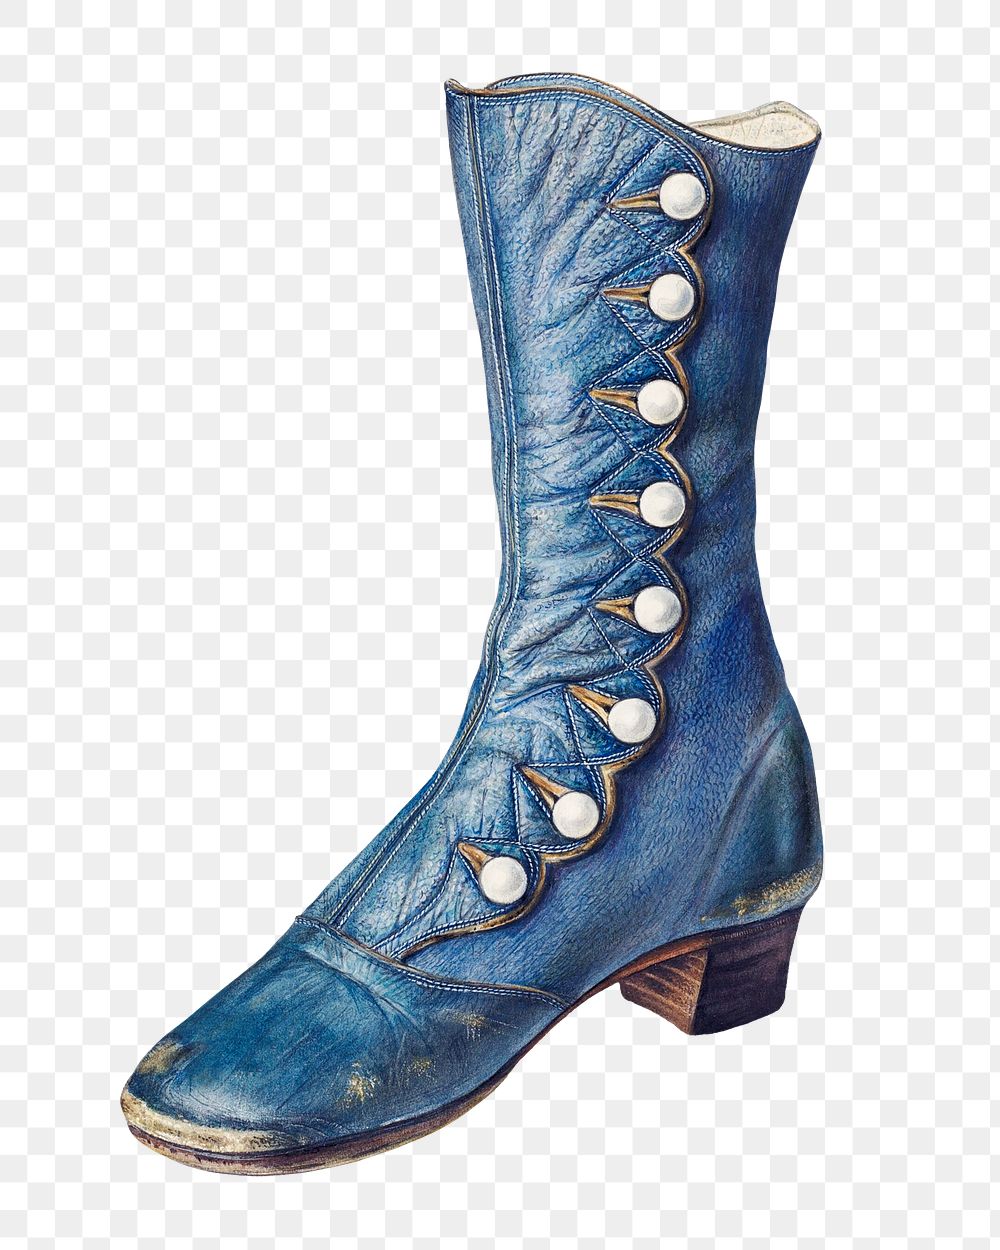 Blue child's boots png on transparent background, remixed by rawpixel